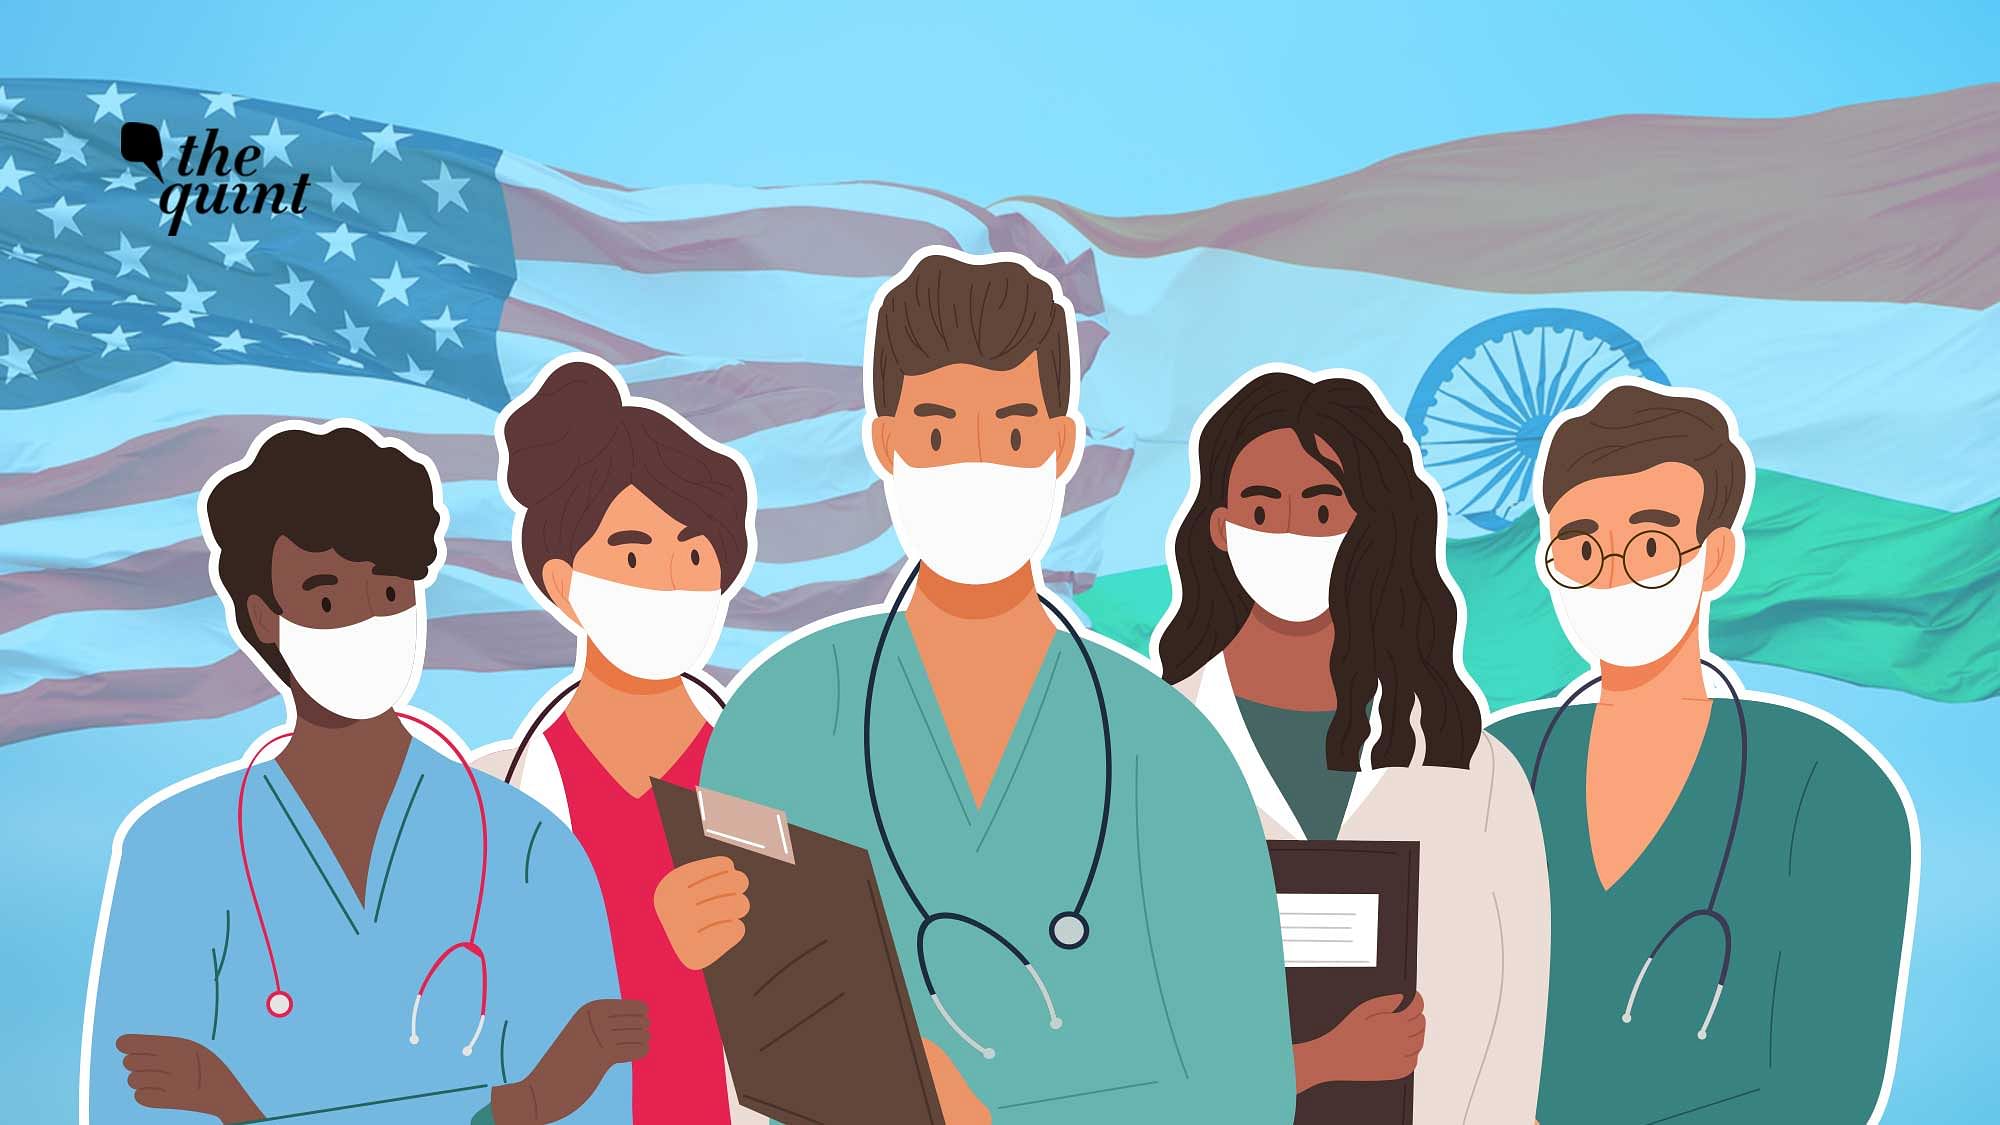 Indian-American physicians are being inundated with messages of help from Indians across India who are struggling to provide medical care for family members suffering from Covid-19, during India’s second Covid-19 wave.